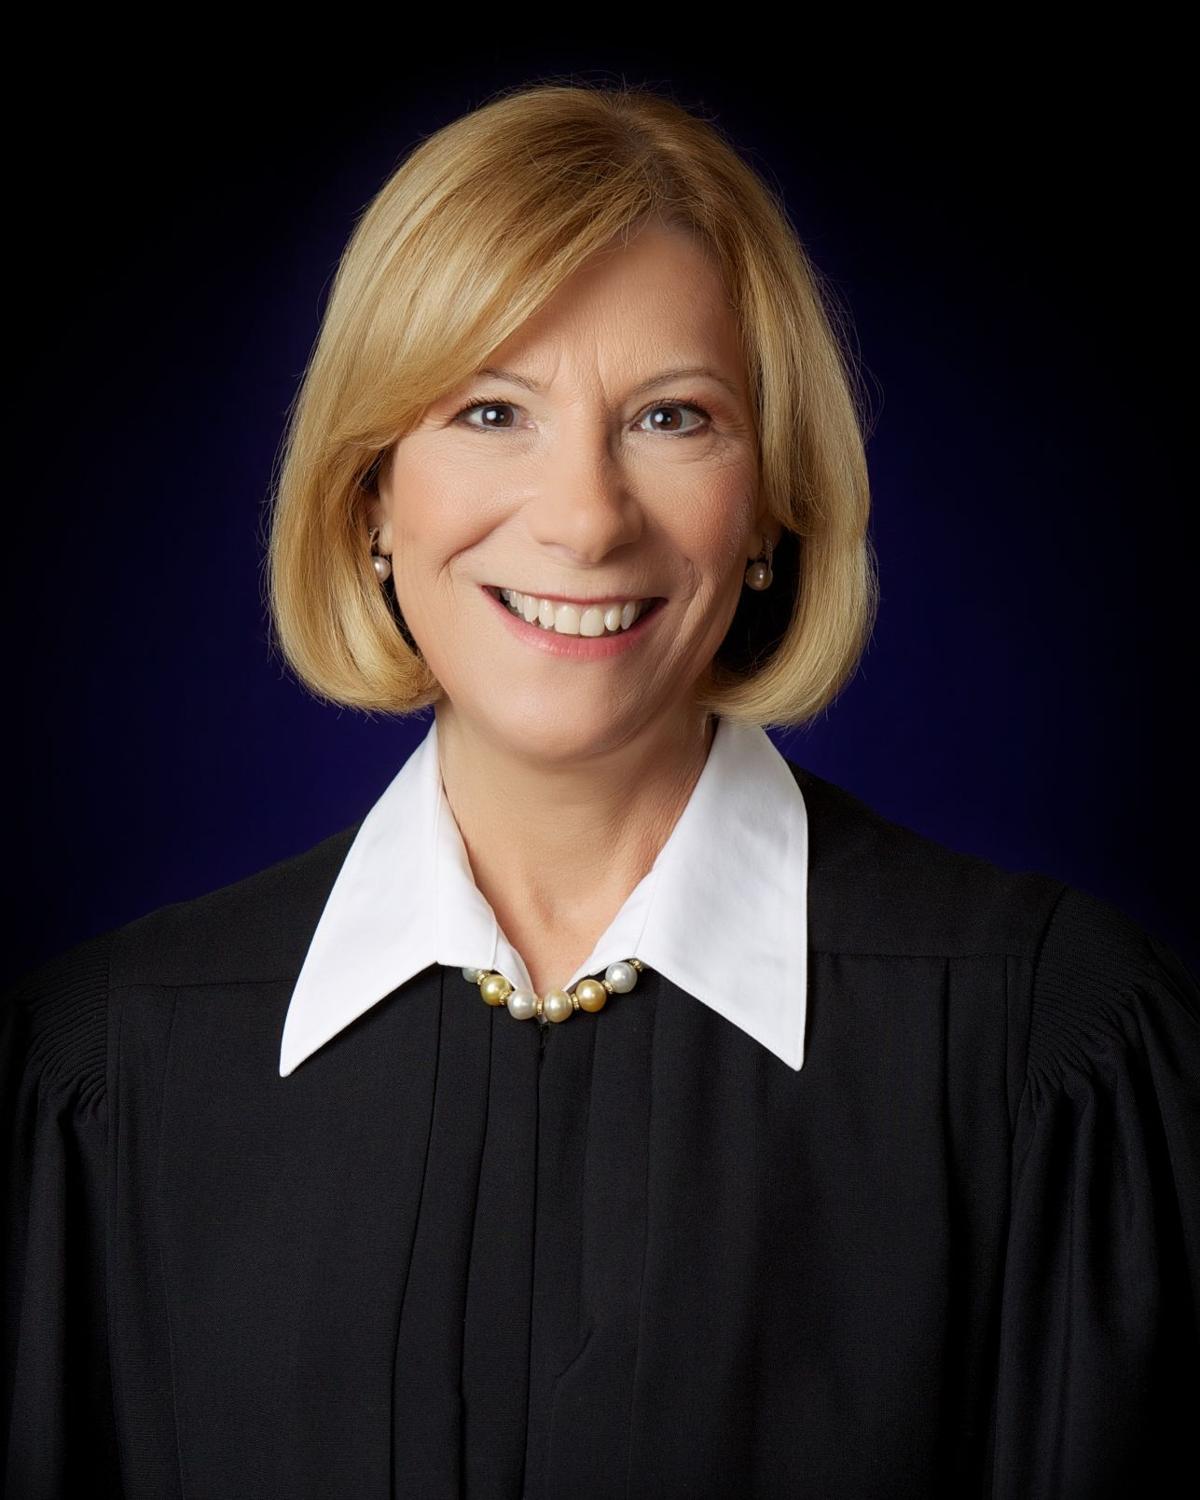 Pa. Commonwealth Court elects Judge Renee Cohn Jubelirer as President